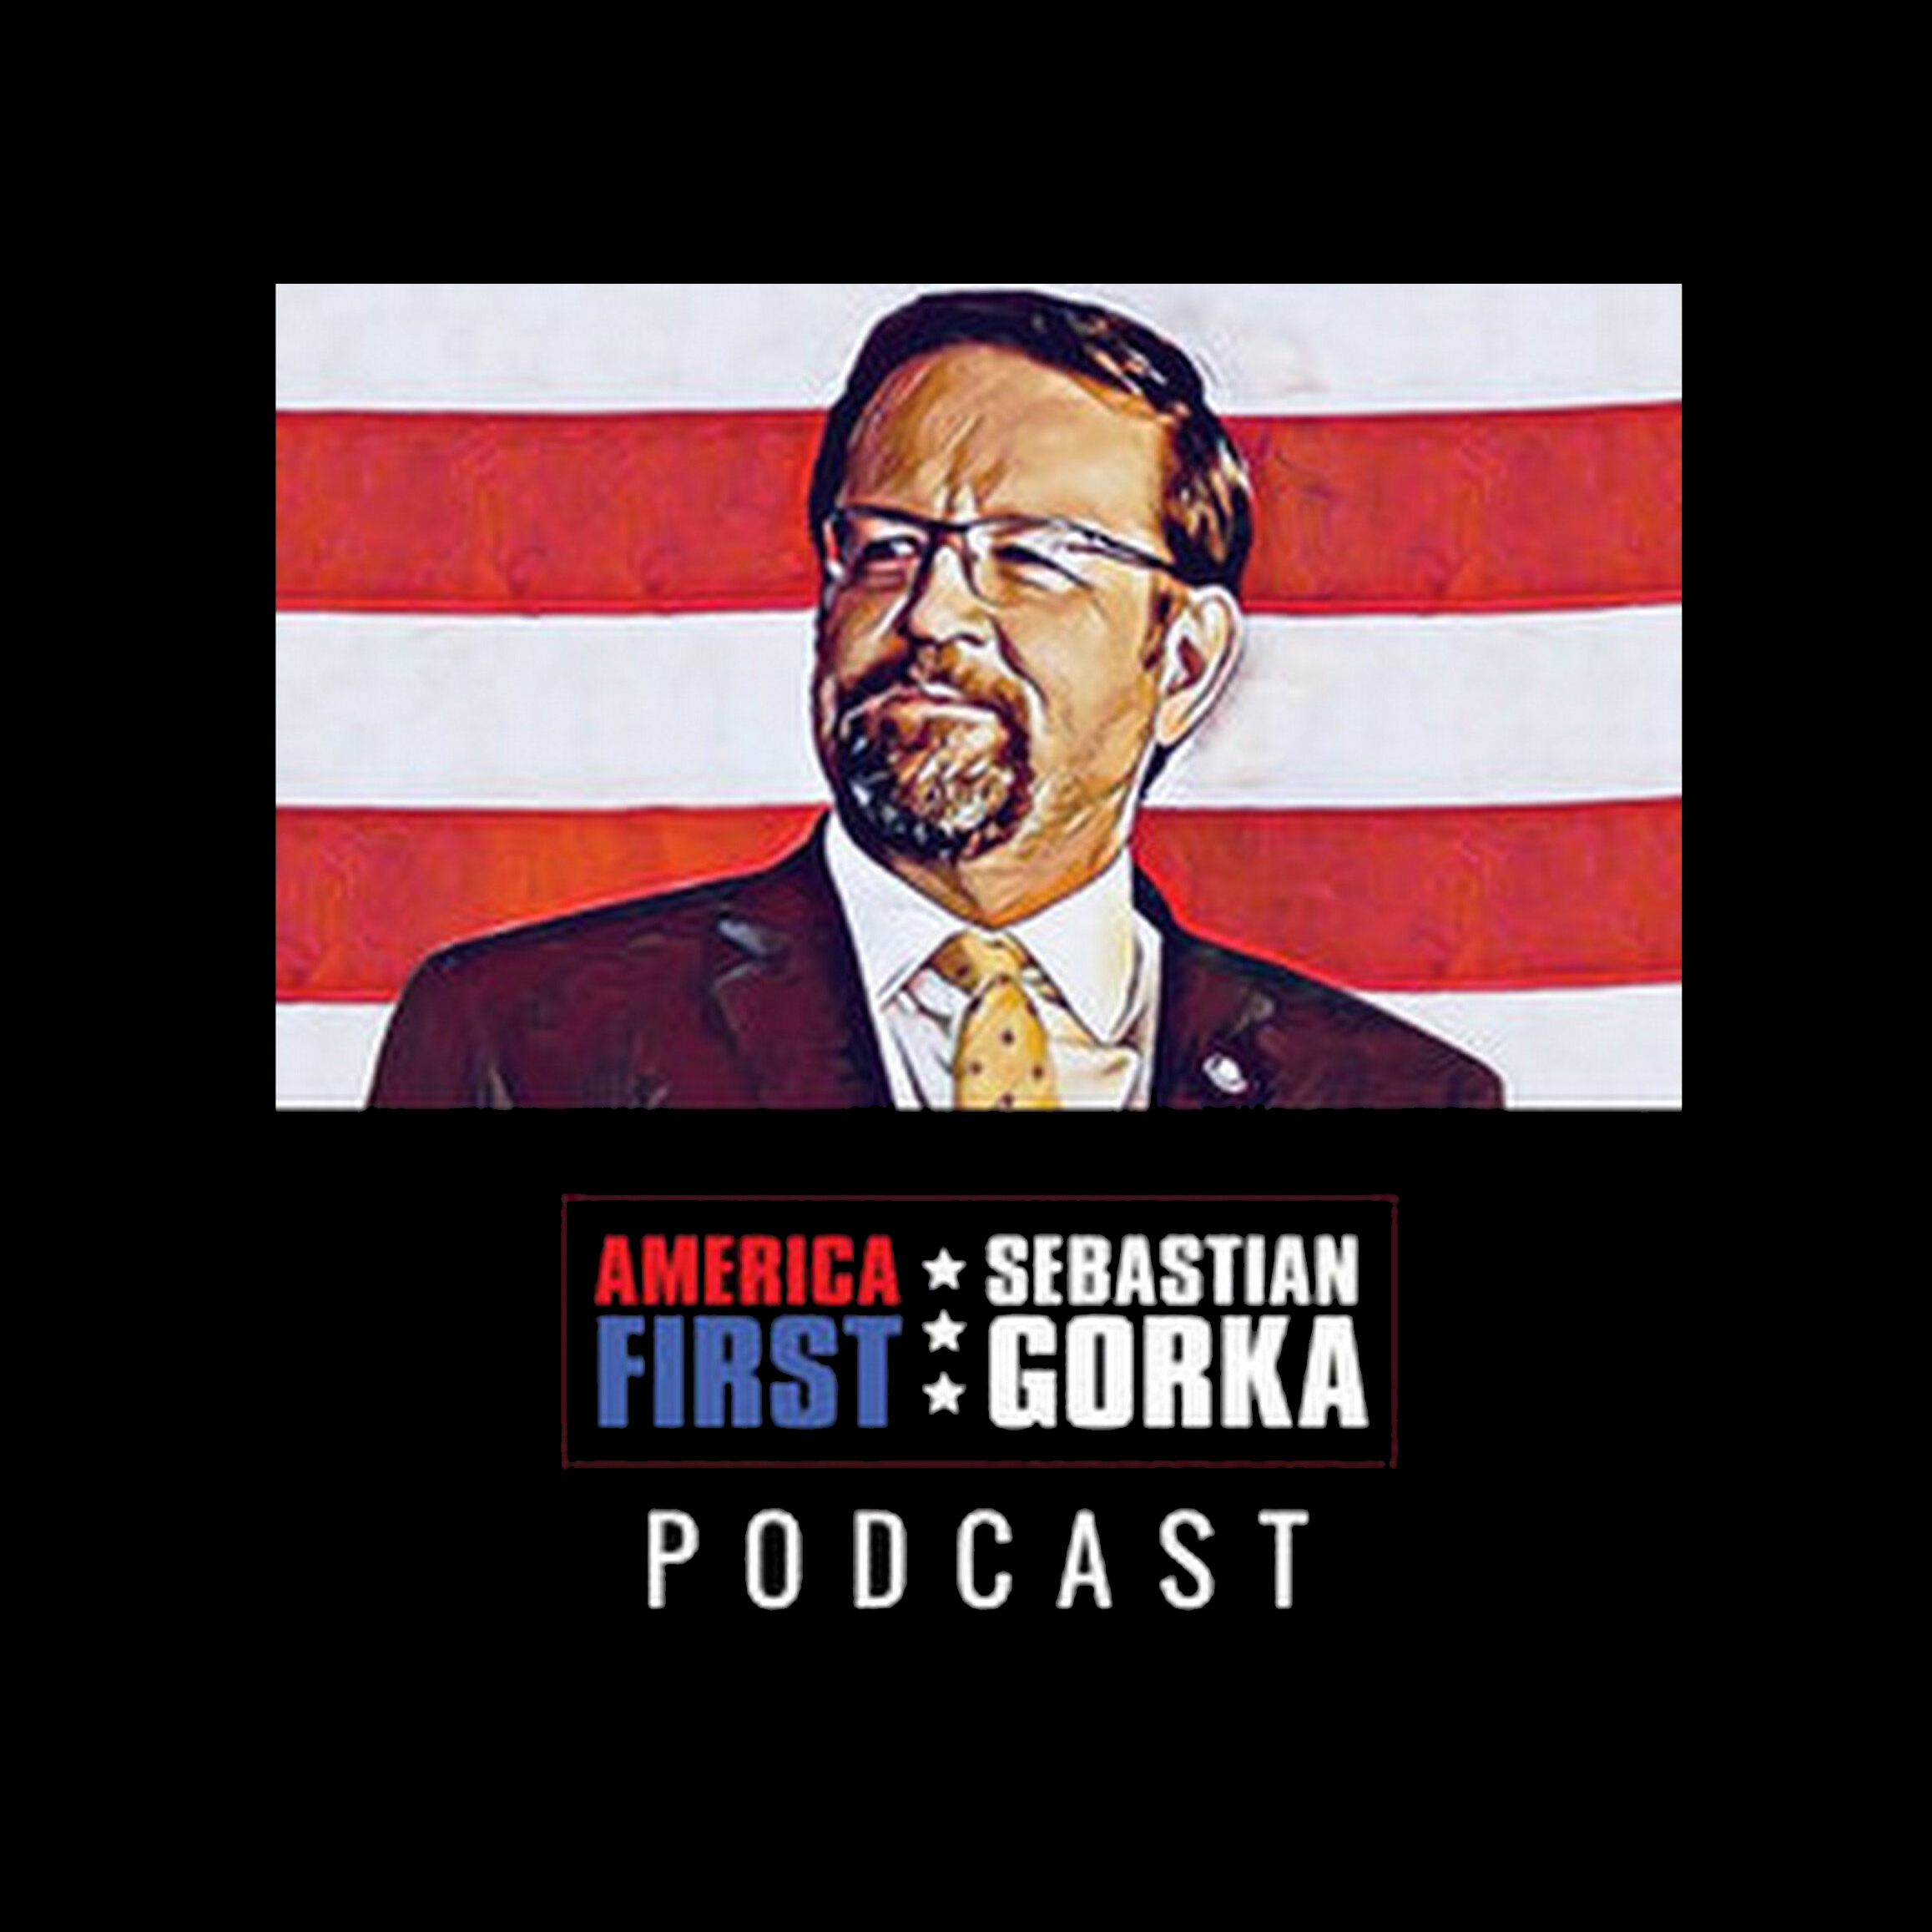 How the FBI can spy on anyone. Kyle Seraphin with Sebastian Gorka on AMERICA First